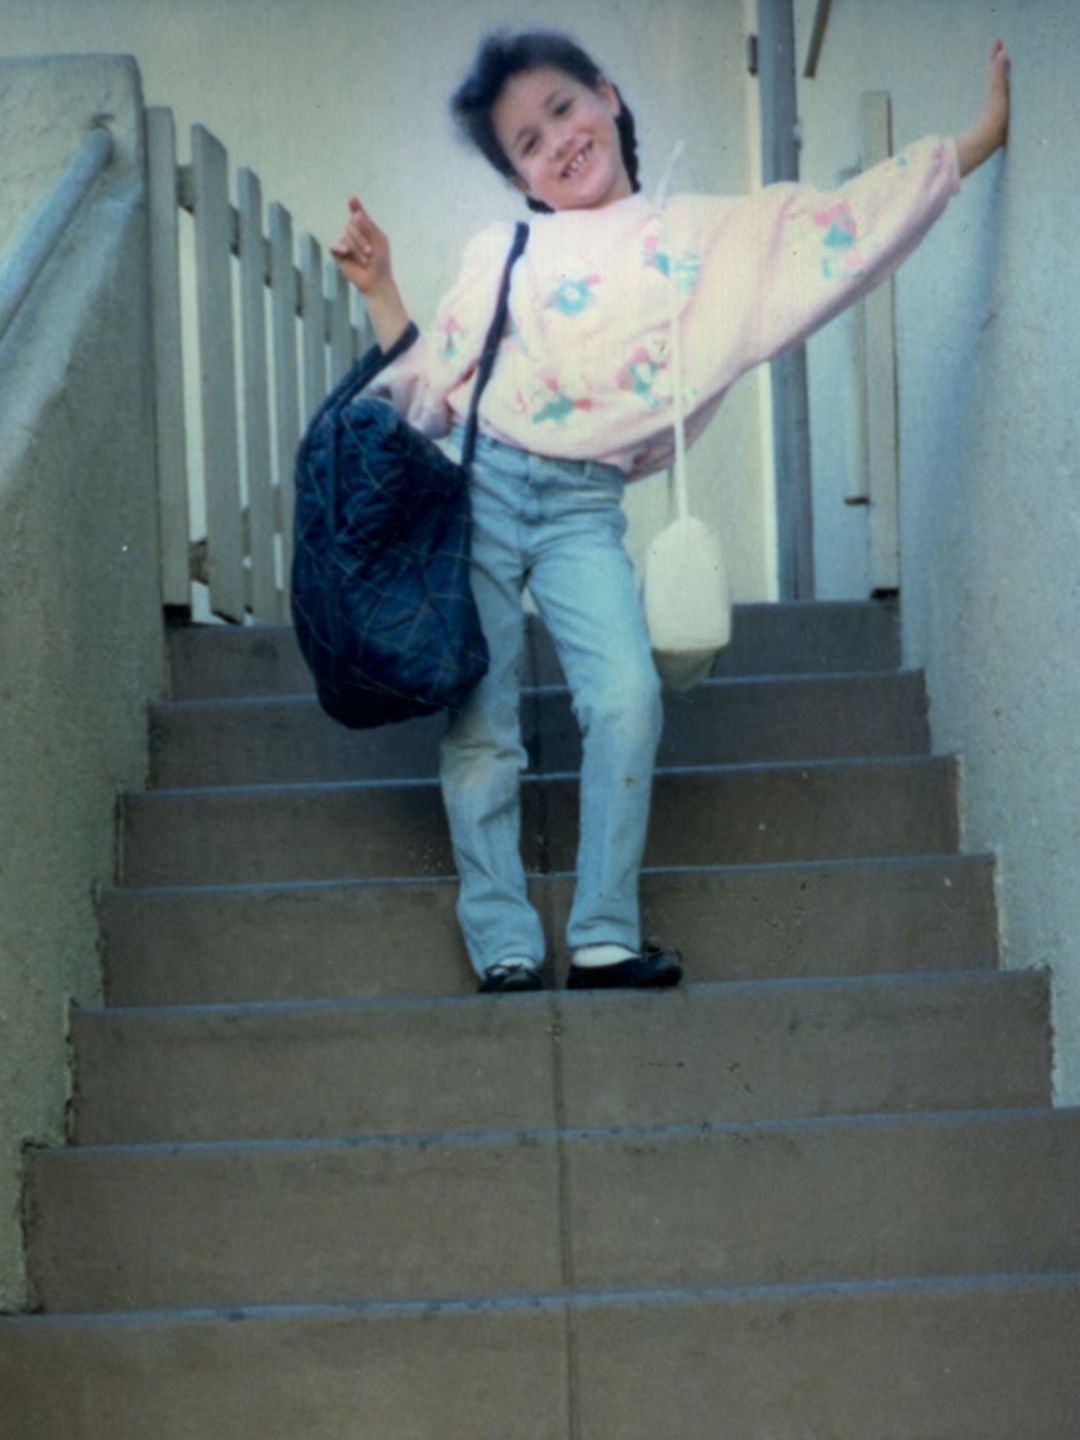 A young Meghan Markle posing with bags on a set of stairs